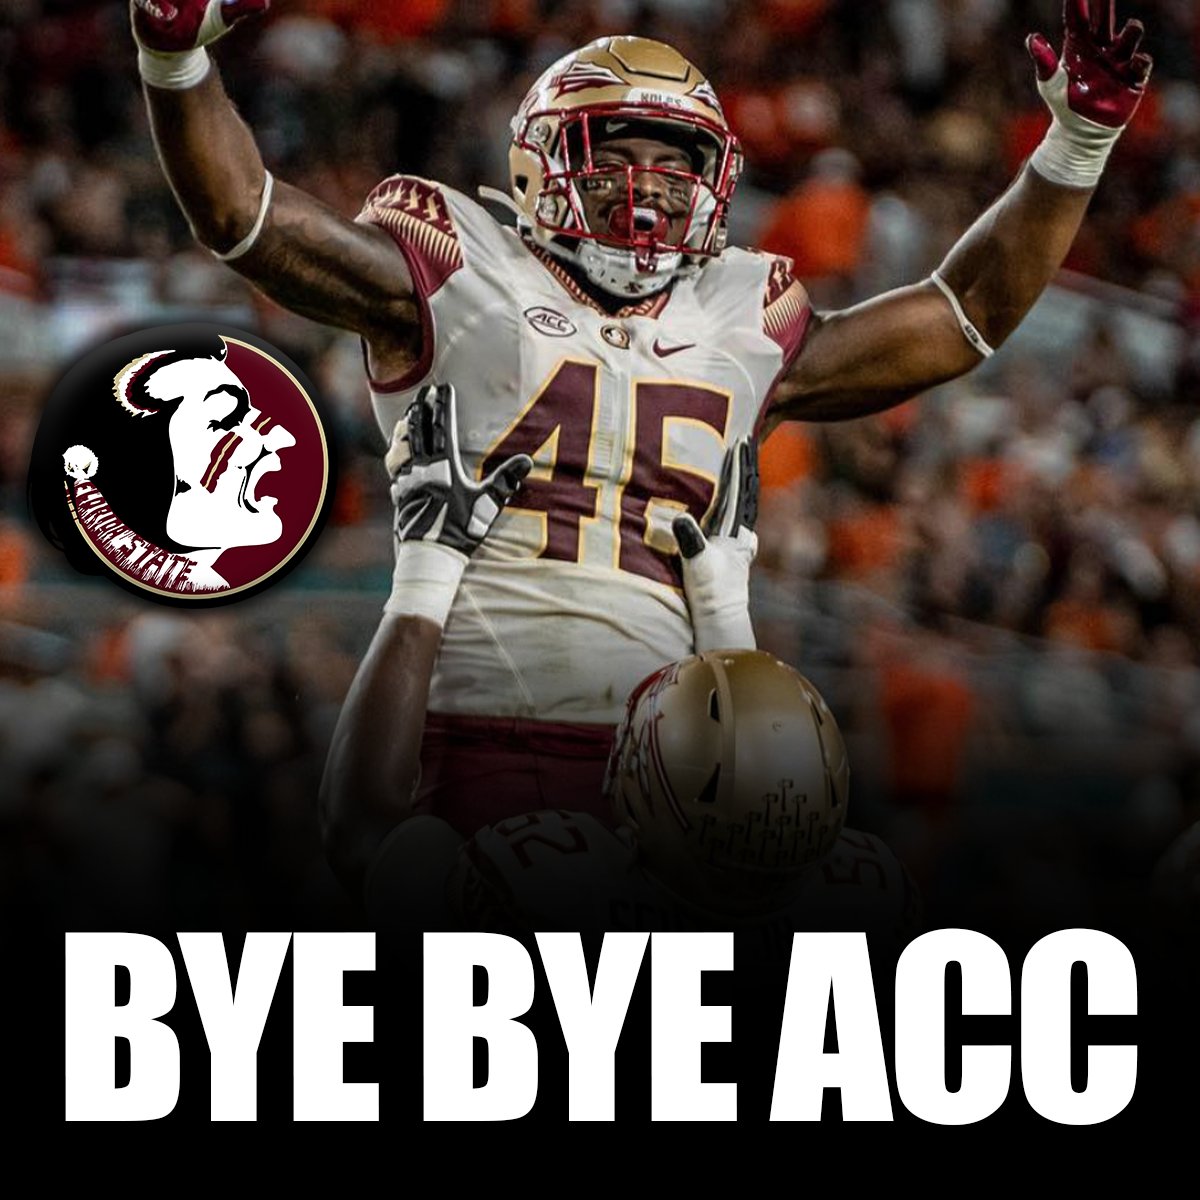 🚨 | BREAKING: The ACC has officially announced that FSU is allowed to buy back their TV rights & exit the conference... A new lawsuit filed Friday has revealed that the ACC is seeking to negotiate with the Noles. Previously, the topic of leaving the ACC was set to hit court,…